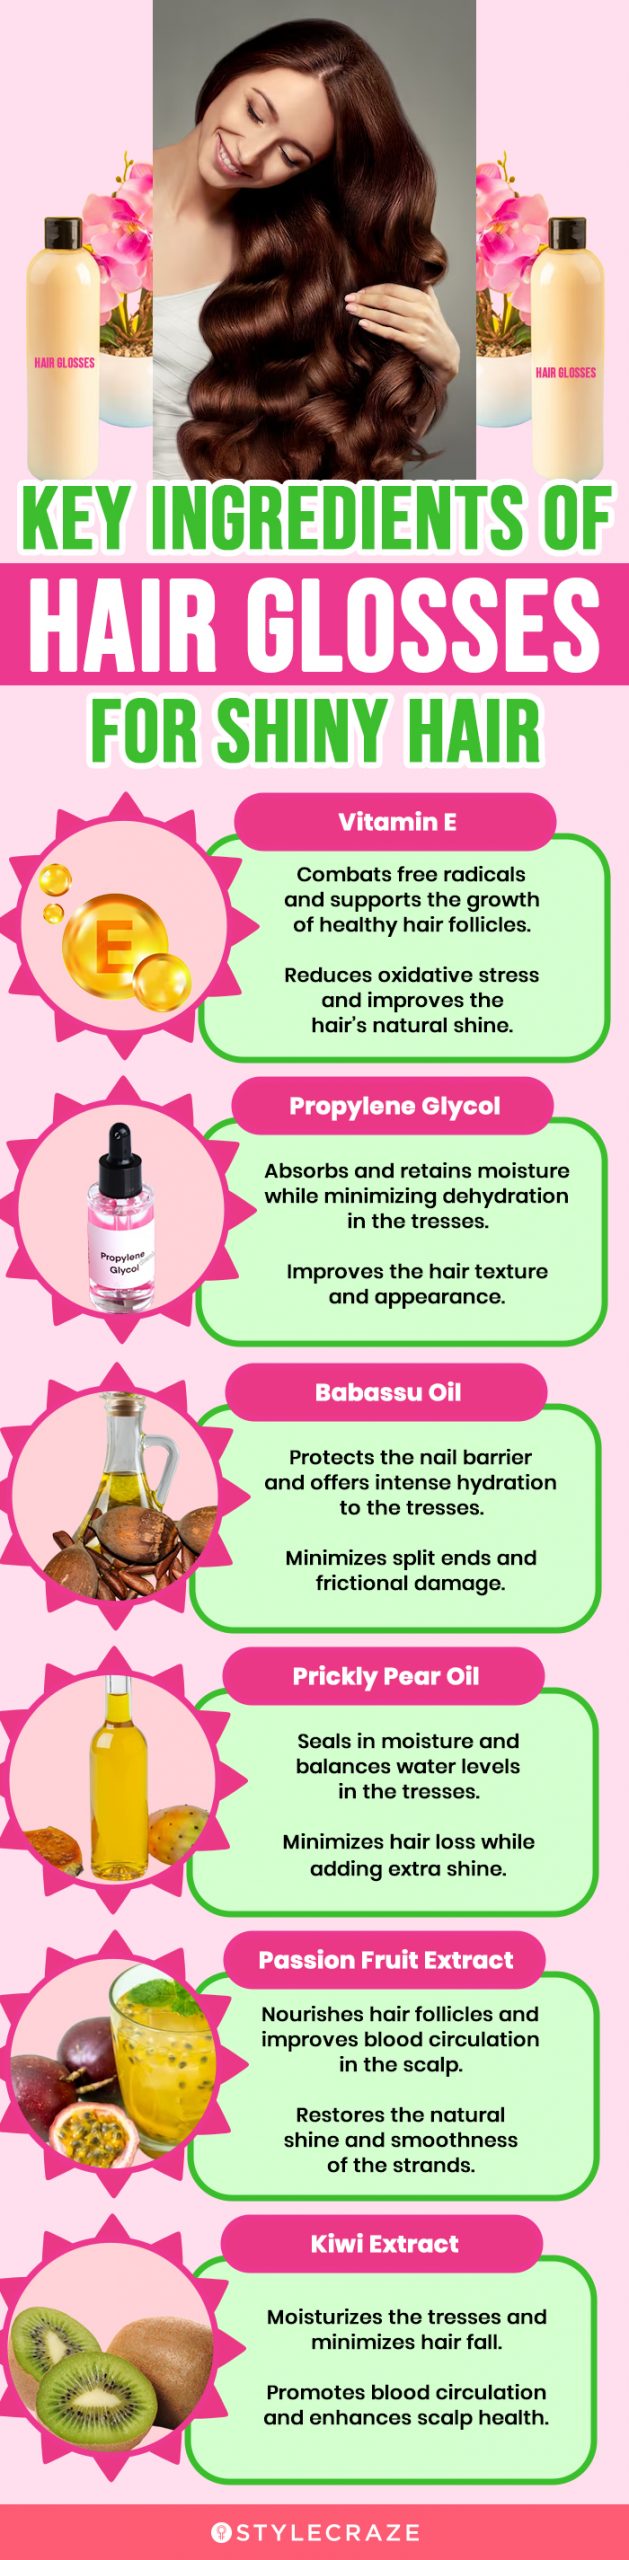 Key Ingredients Of Hair Glosses For Shiny Hair (infographic)